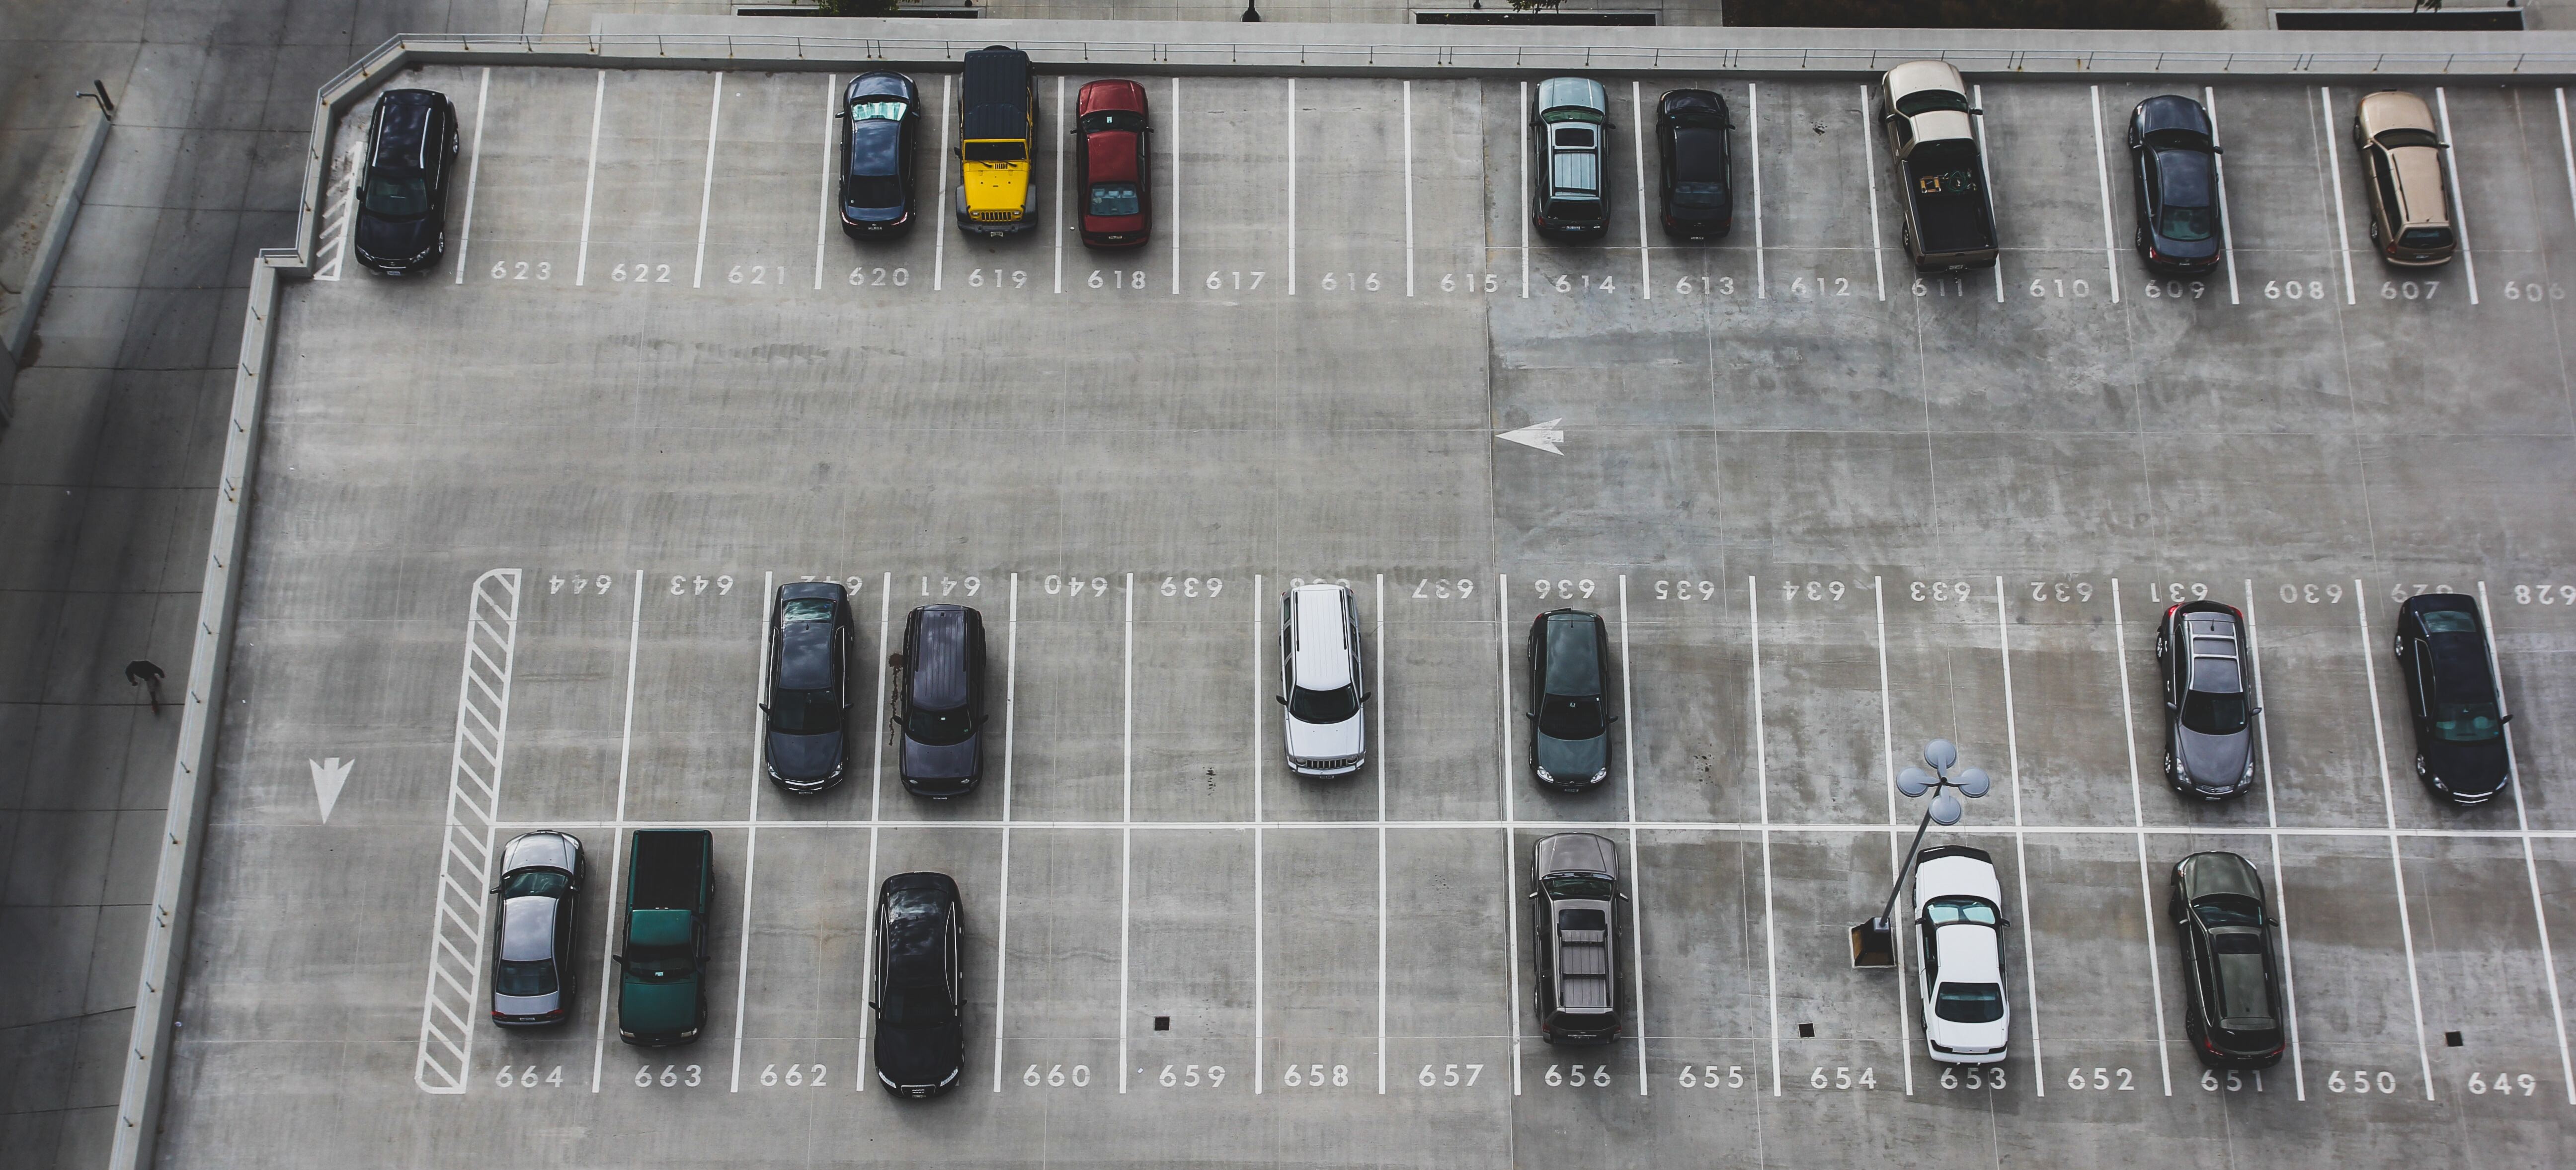 How to Find Your Car In A Parking Lot